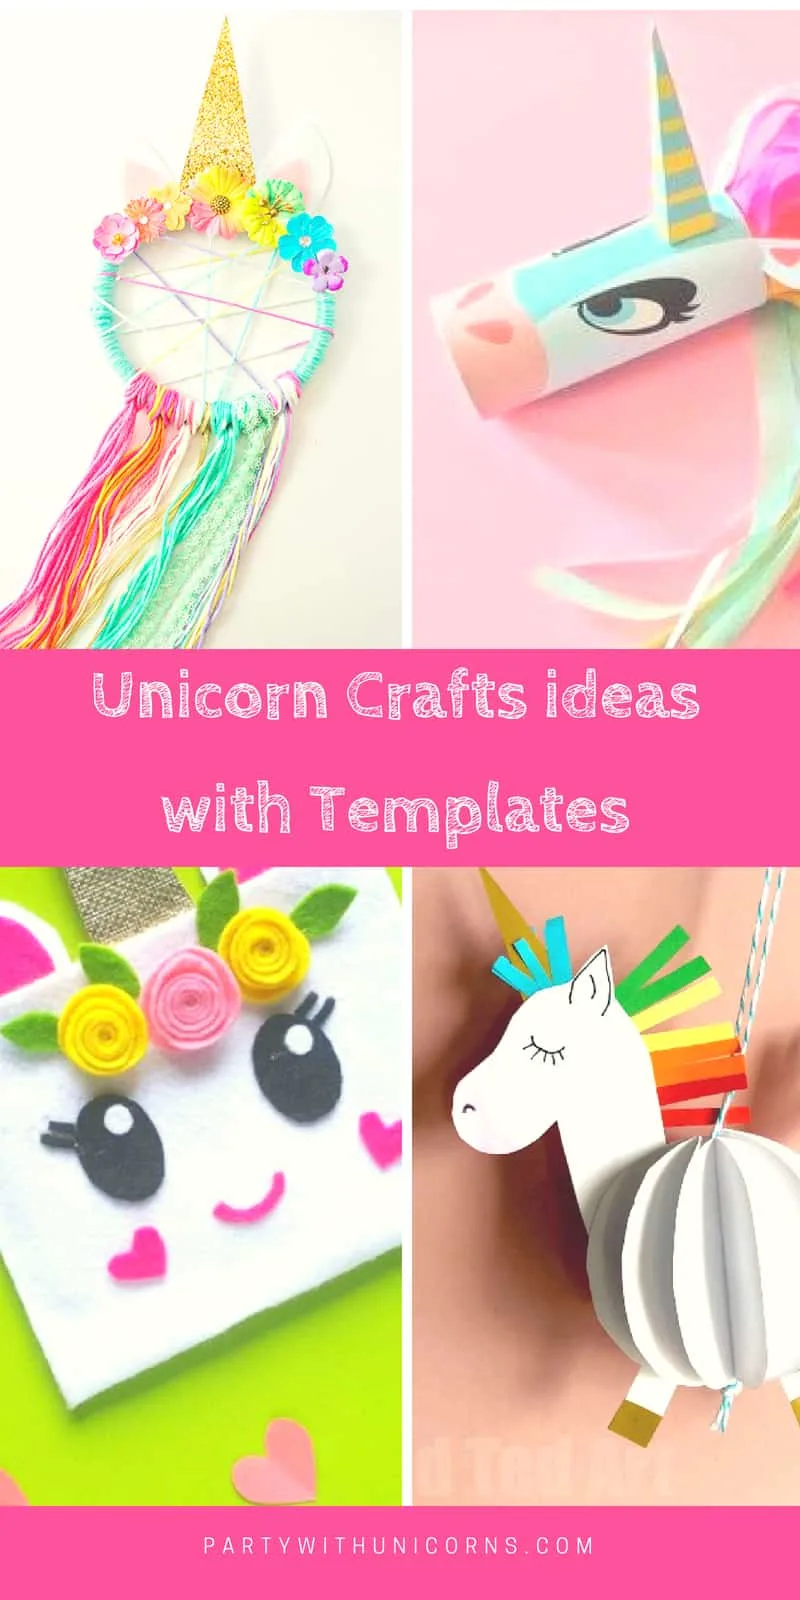 Download Unicorn Crafts Free Templates Party With Unicorns Beyblade Roblox Cake Paw Patrol